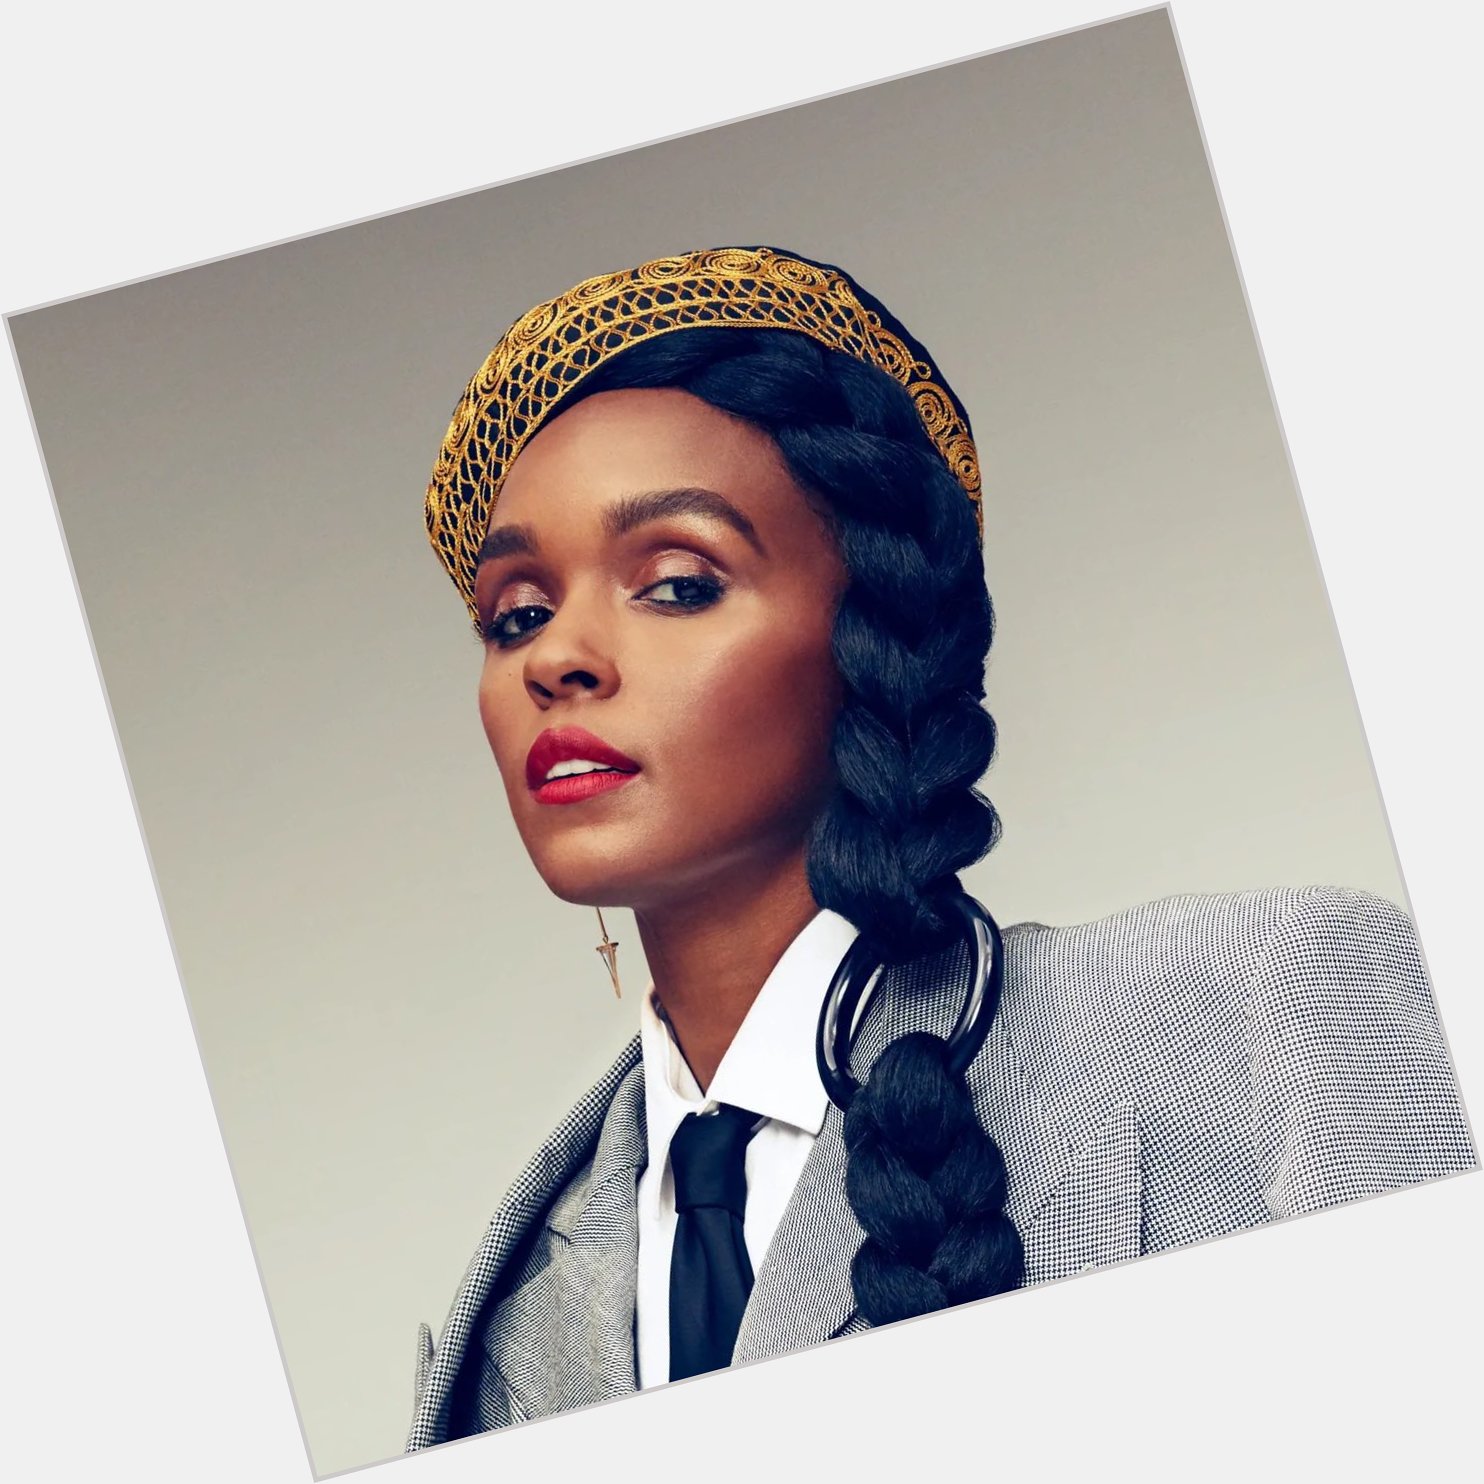 Happy belated 37th birthday to Janelle Monaé I hope you have had a wonderful 37th birthday      